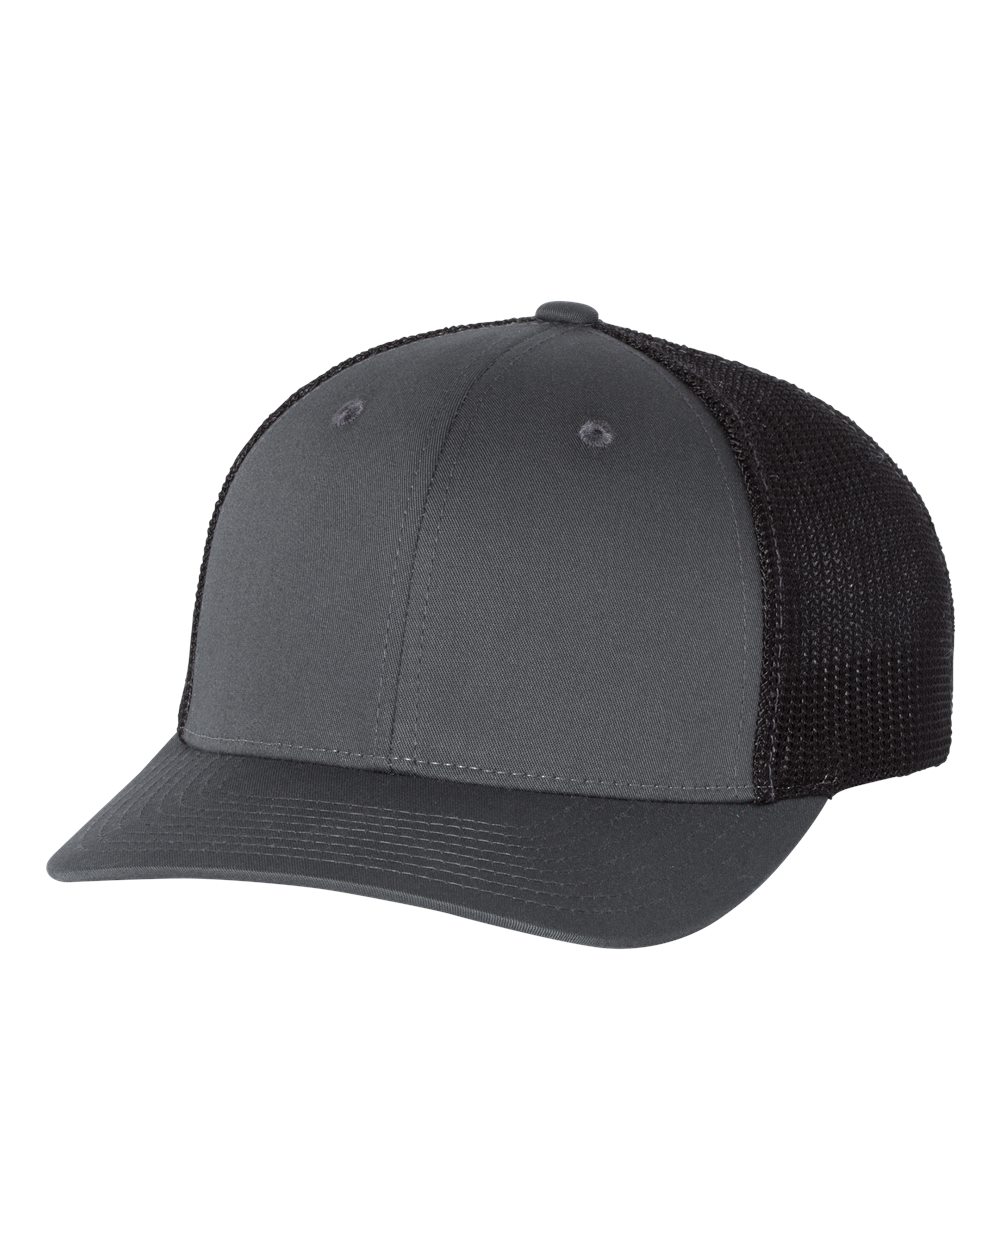 Richardson Fitted Trucker with R-Flex 110 